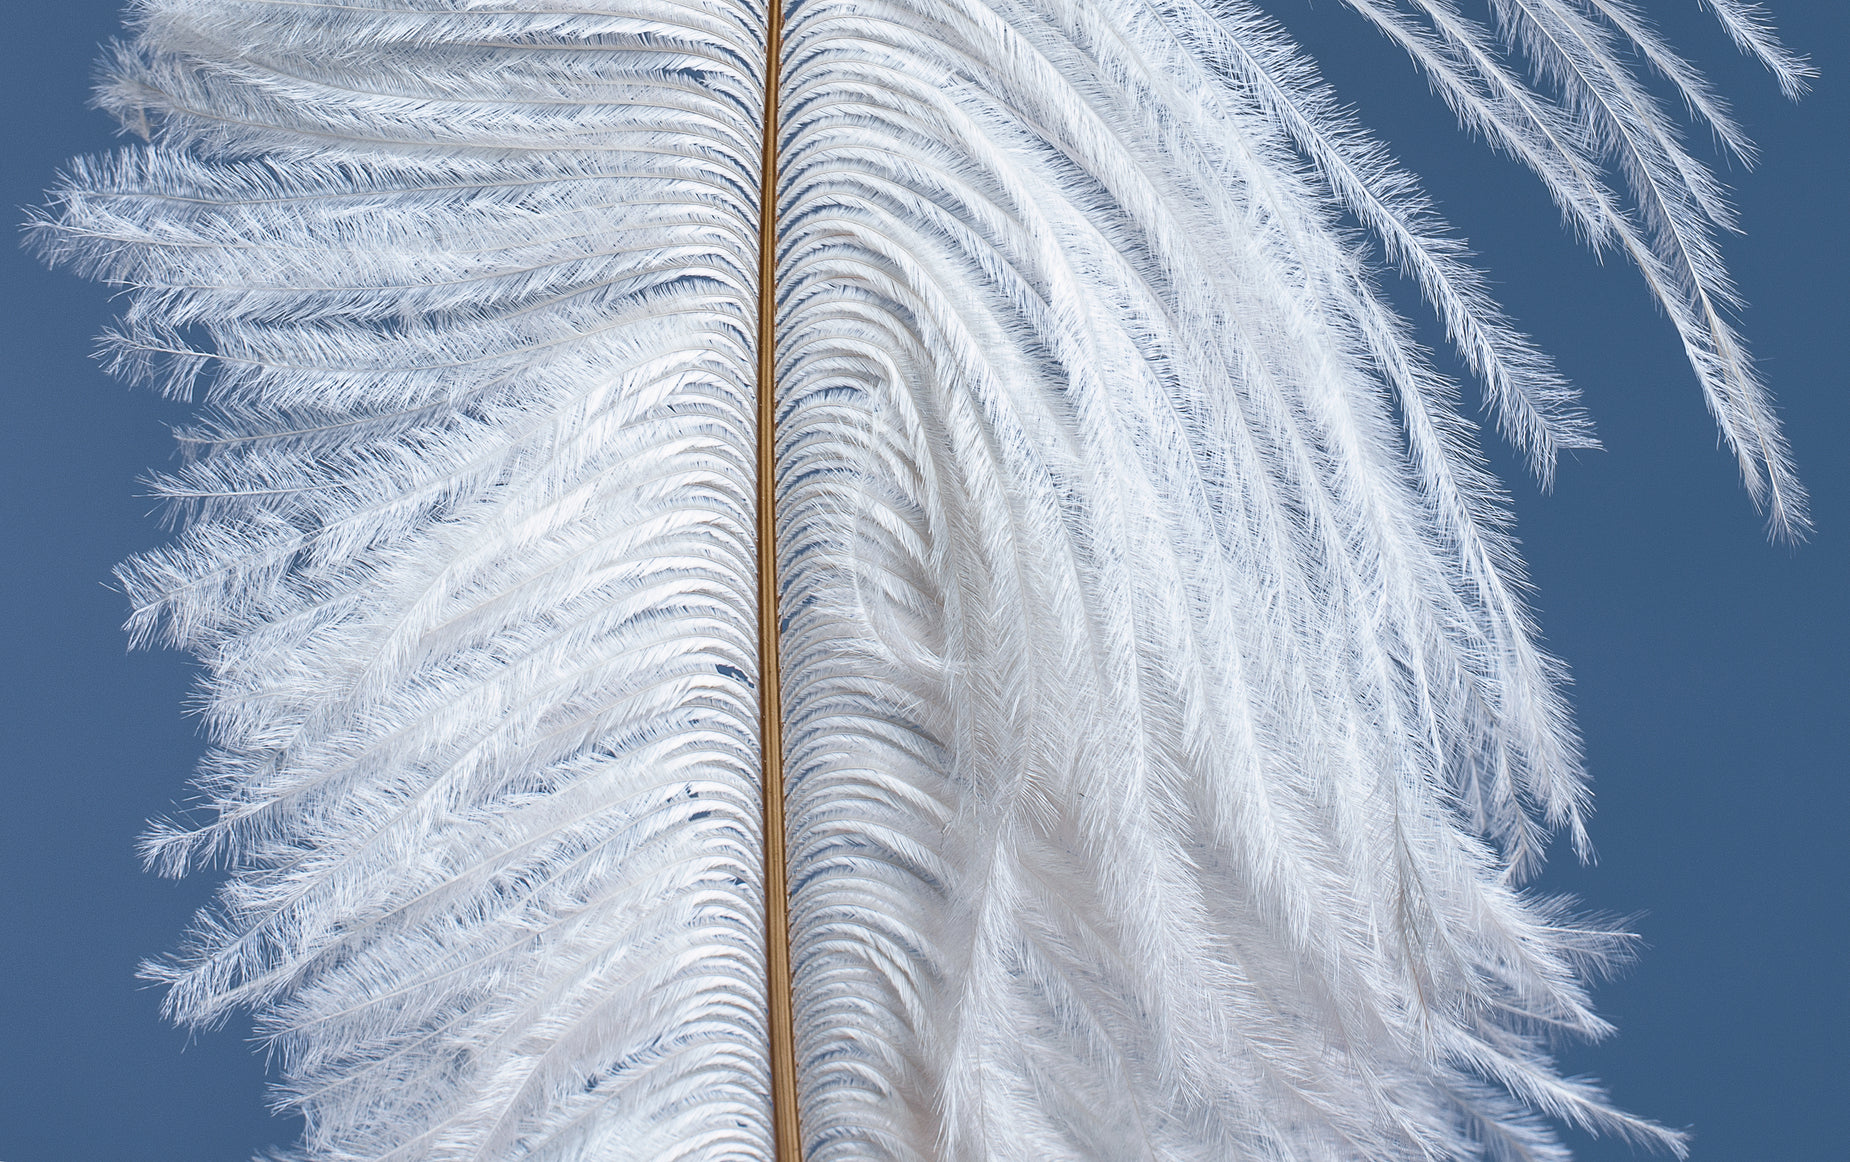 the back side of a feather showing fluffy white feathers